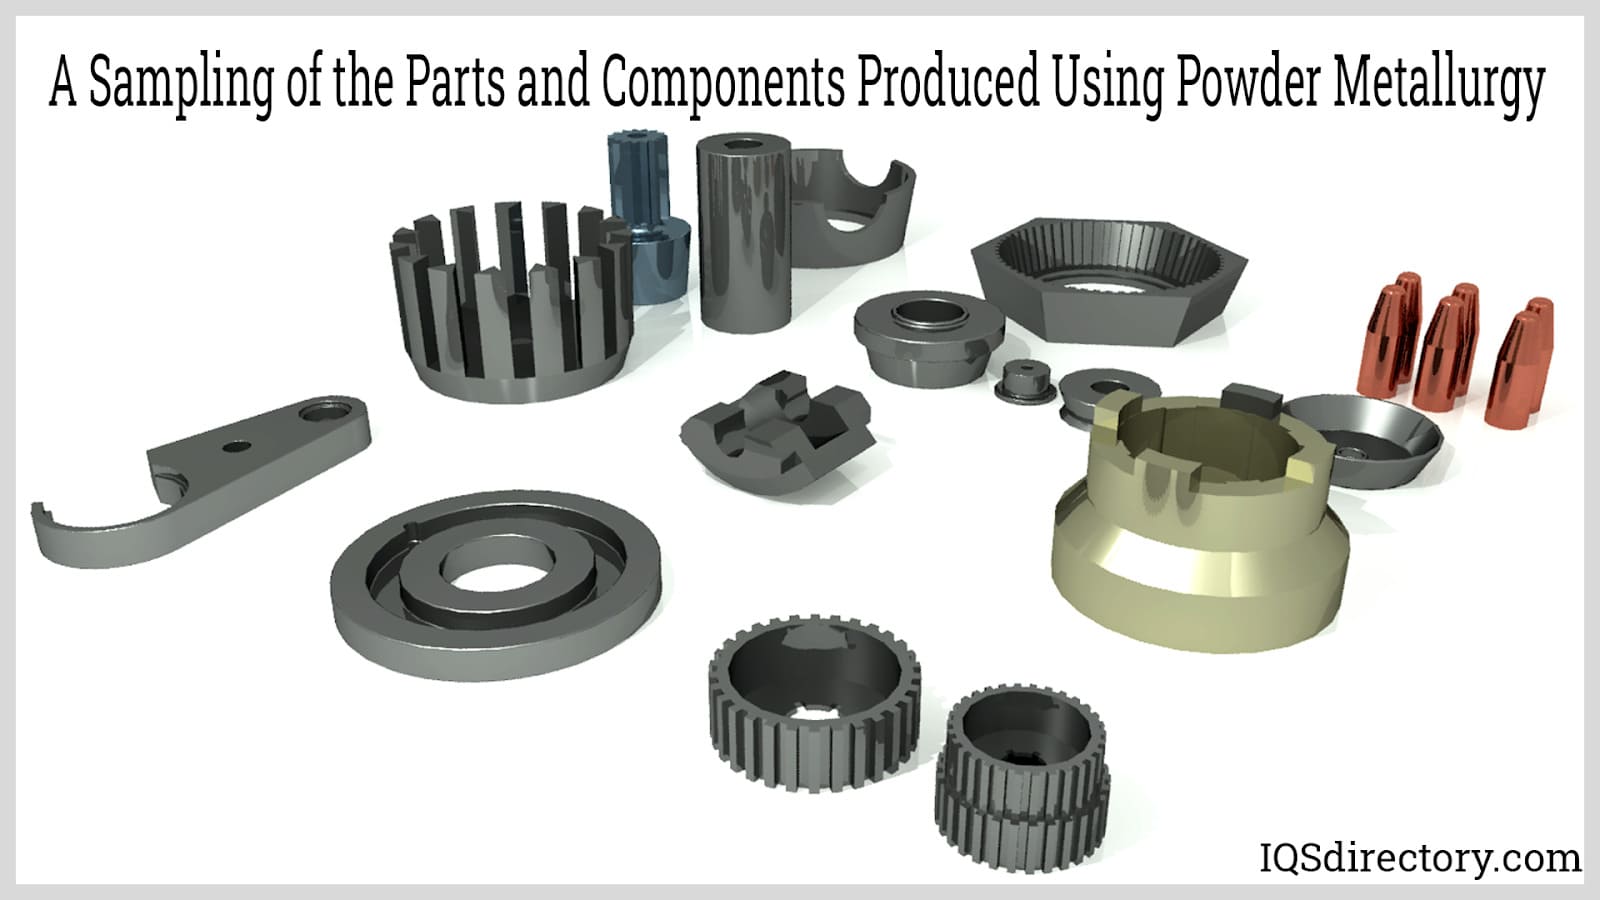 A Sampling of the Parts and Components Produced using Powder Metallurgy